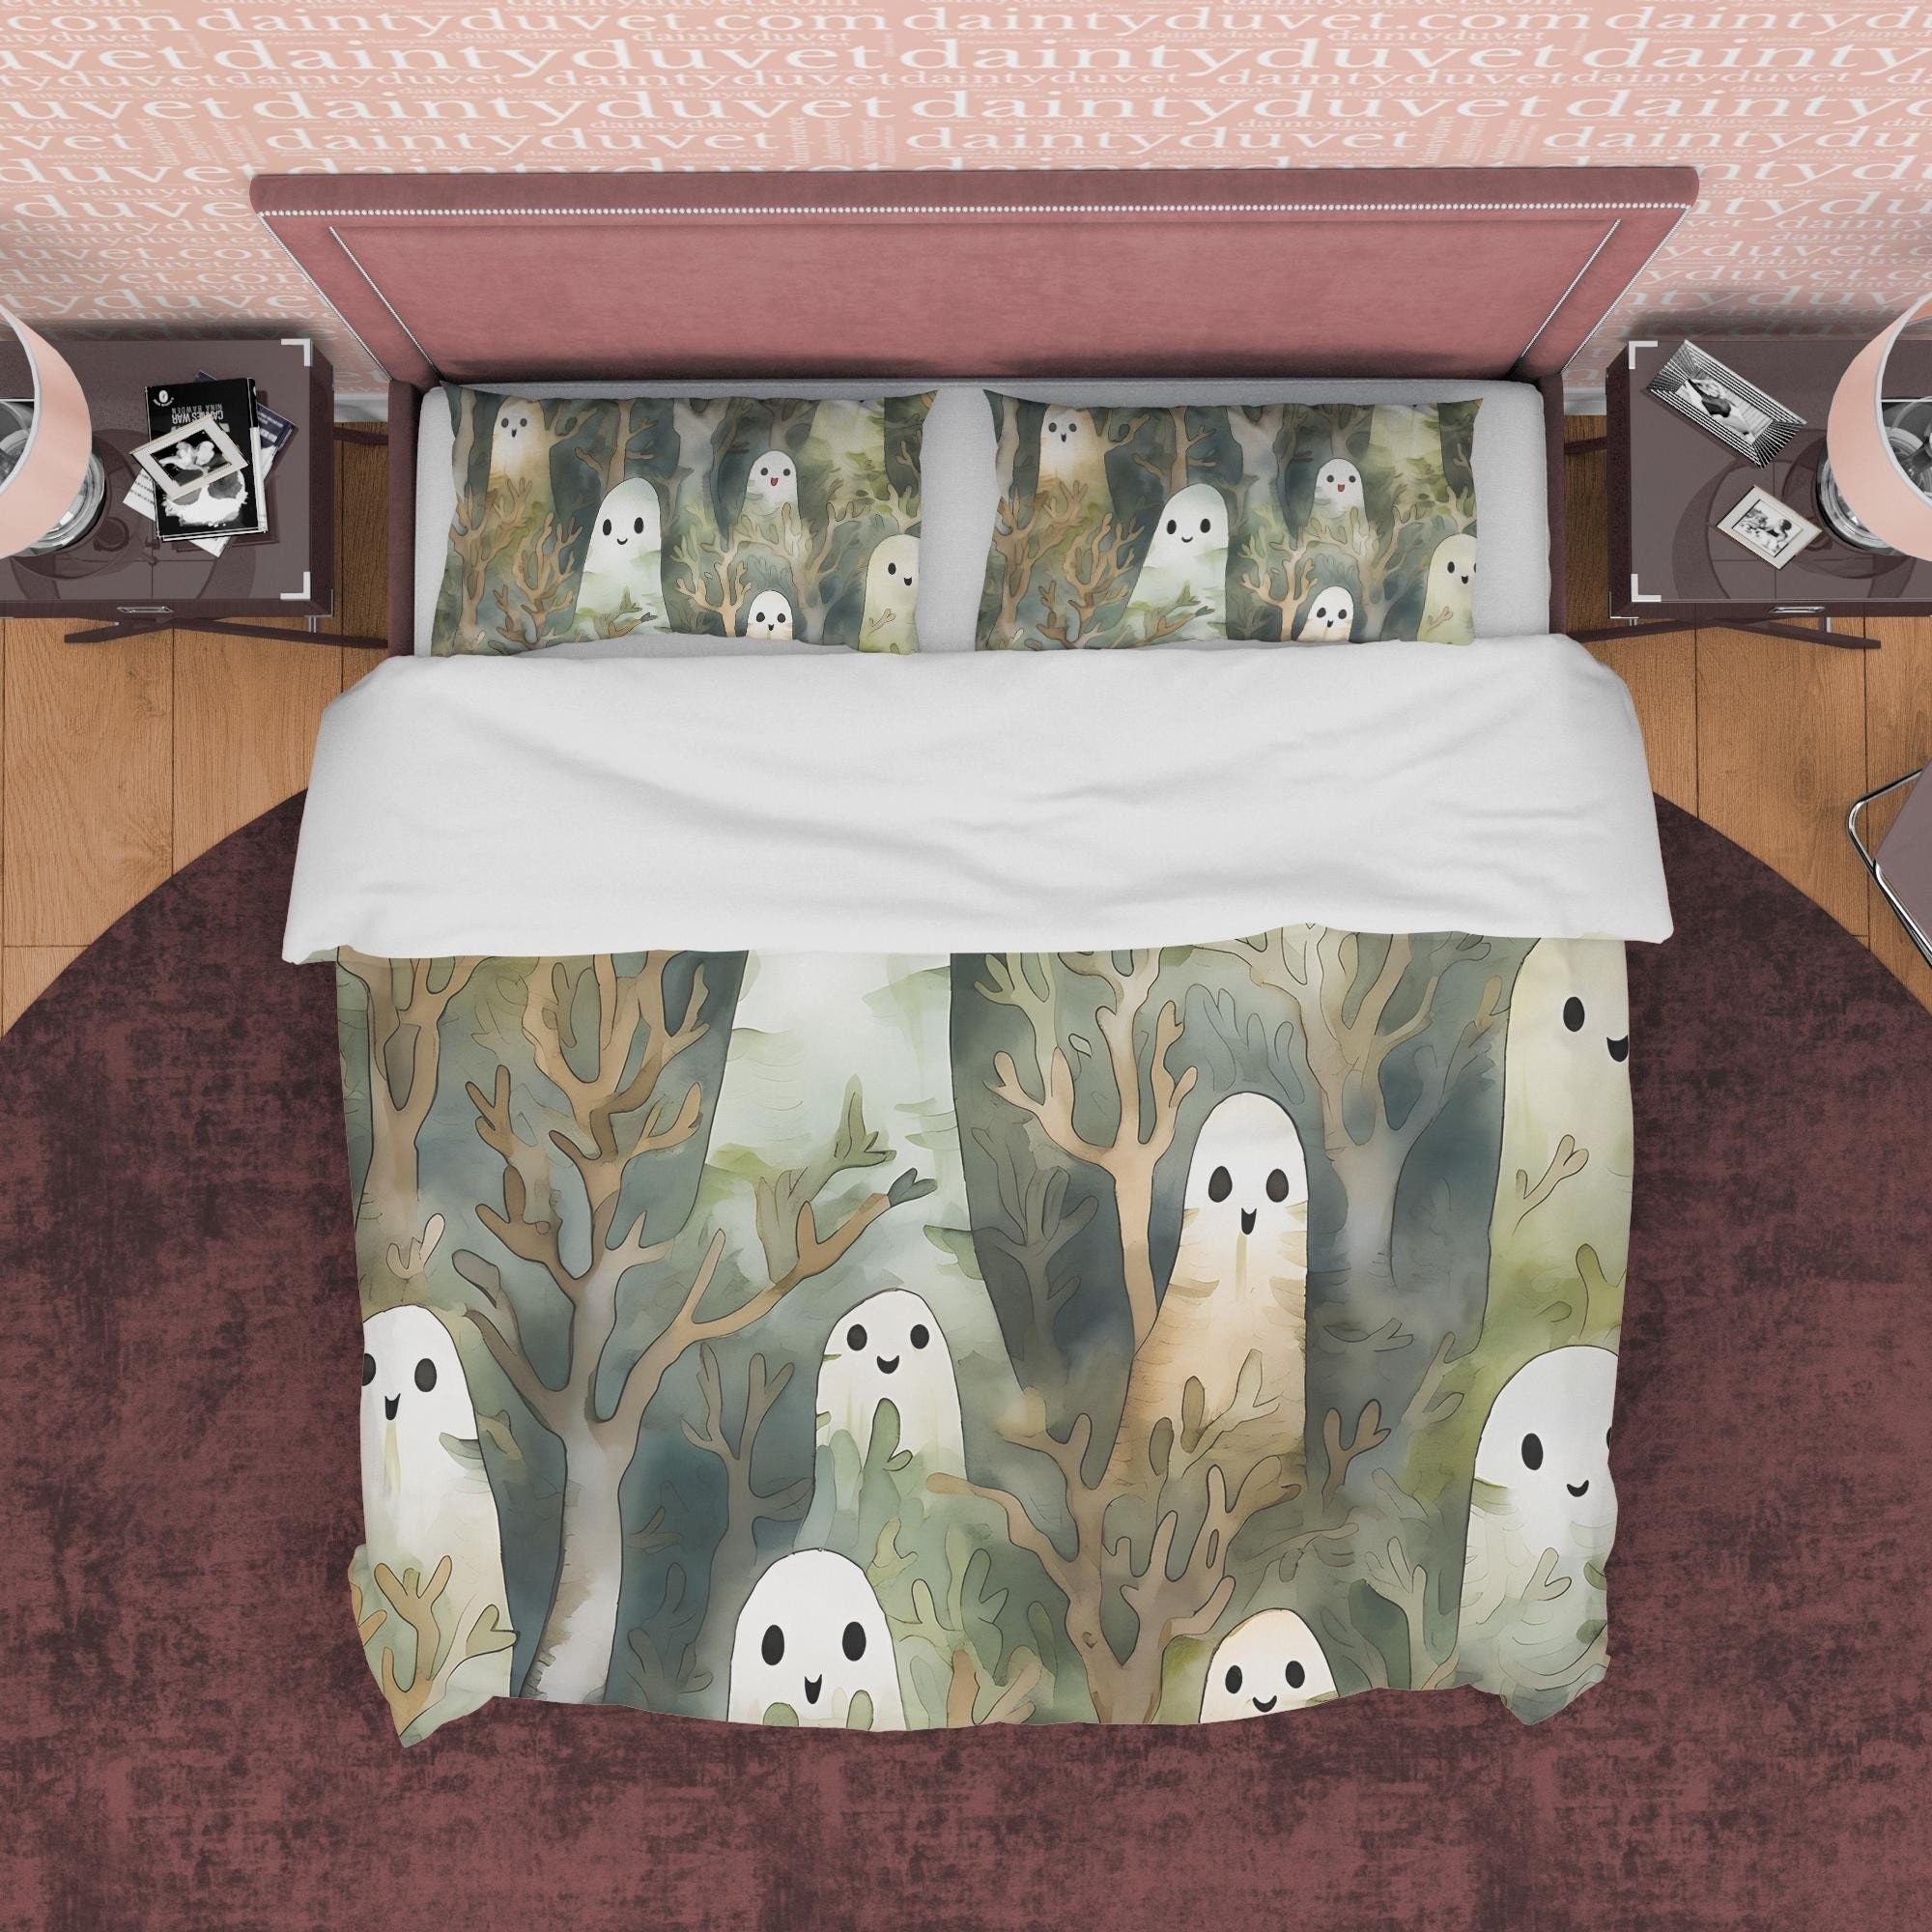 Happy Ghost Duvet Cover Set, Enchanted Forest Child's Bedroom Quilt Cover Aesthetic Zipper Bedding, Halloween Room Decor, Unique Bed Cover